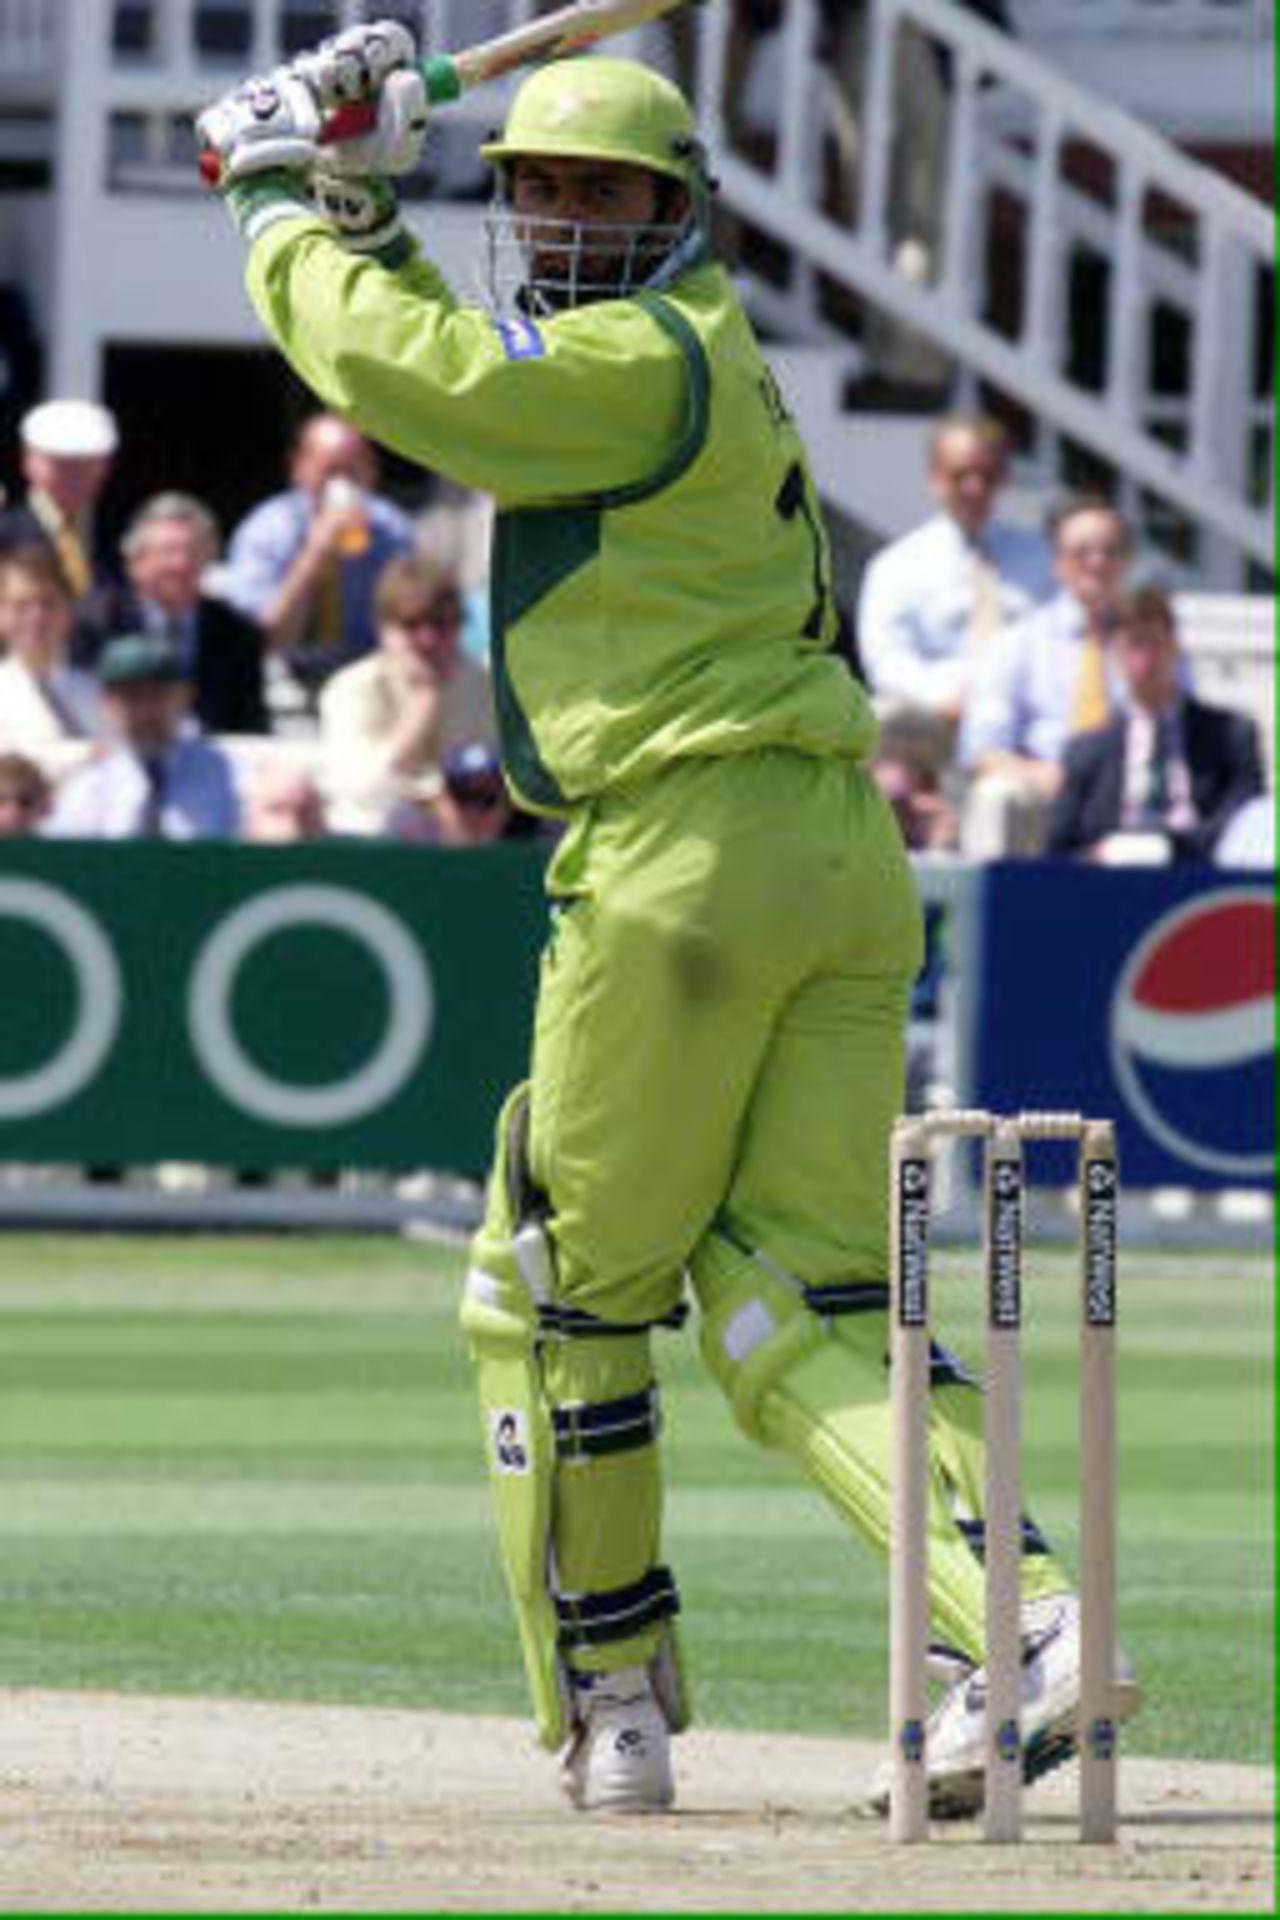 Abdul Razzaq of Pakistan in action during the World Cup Cricket Final between Australia and Pakistan, 20 June 1999, at Lords, London. He survived being caught soon after when Glenn McGrath let a catch spill from his hands